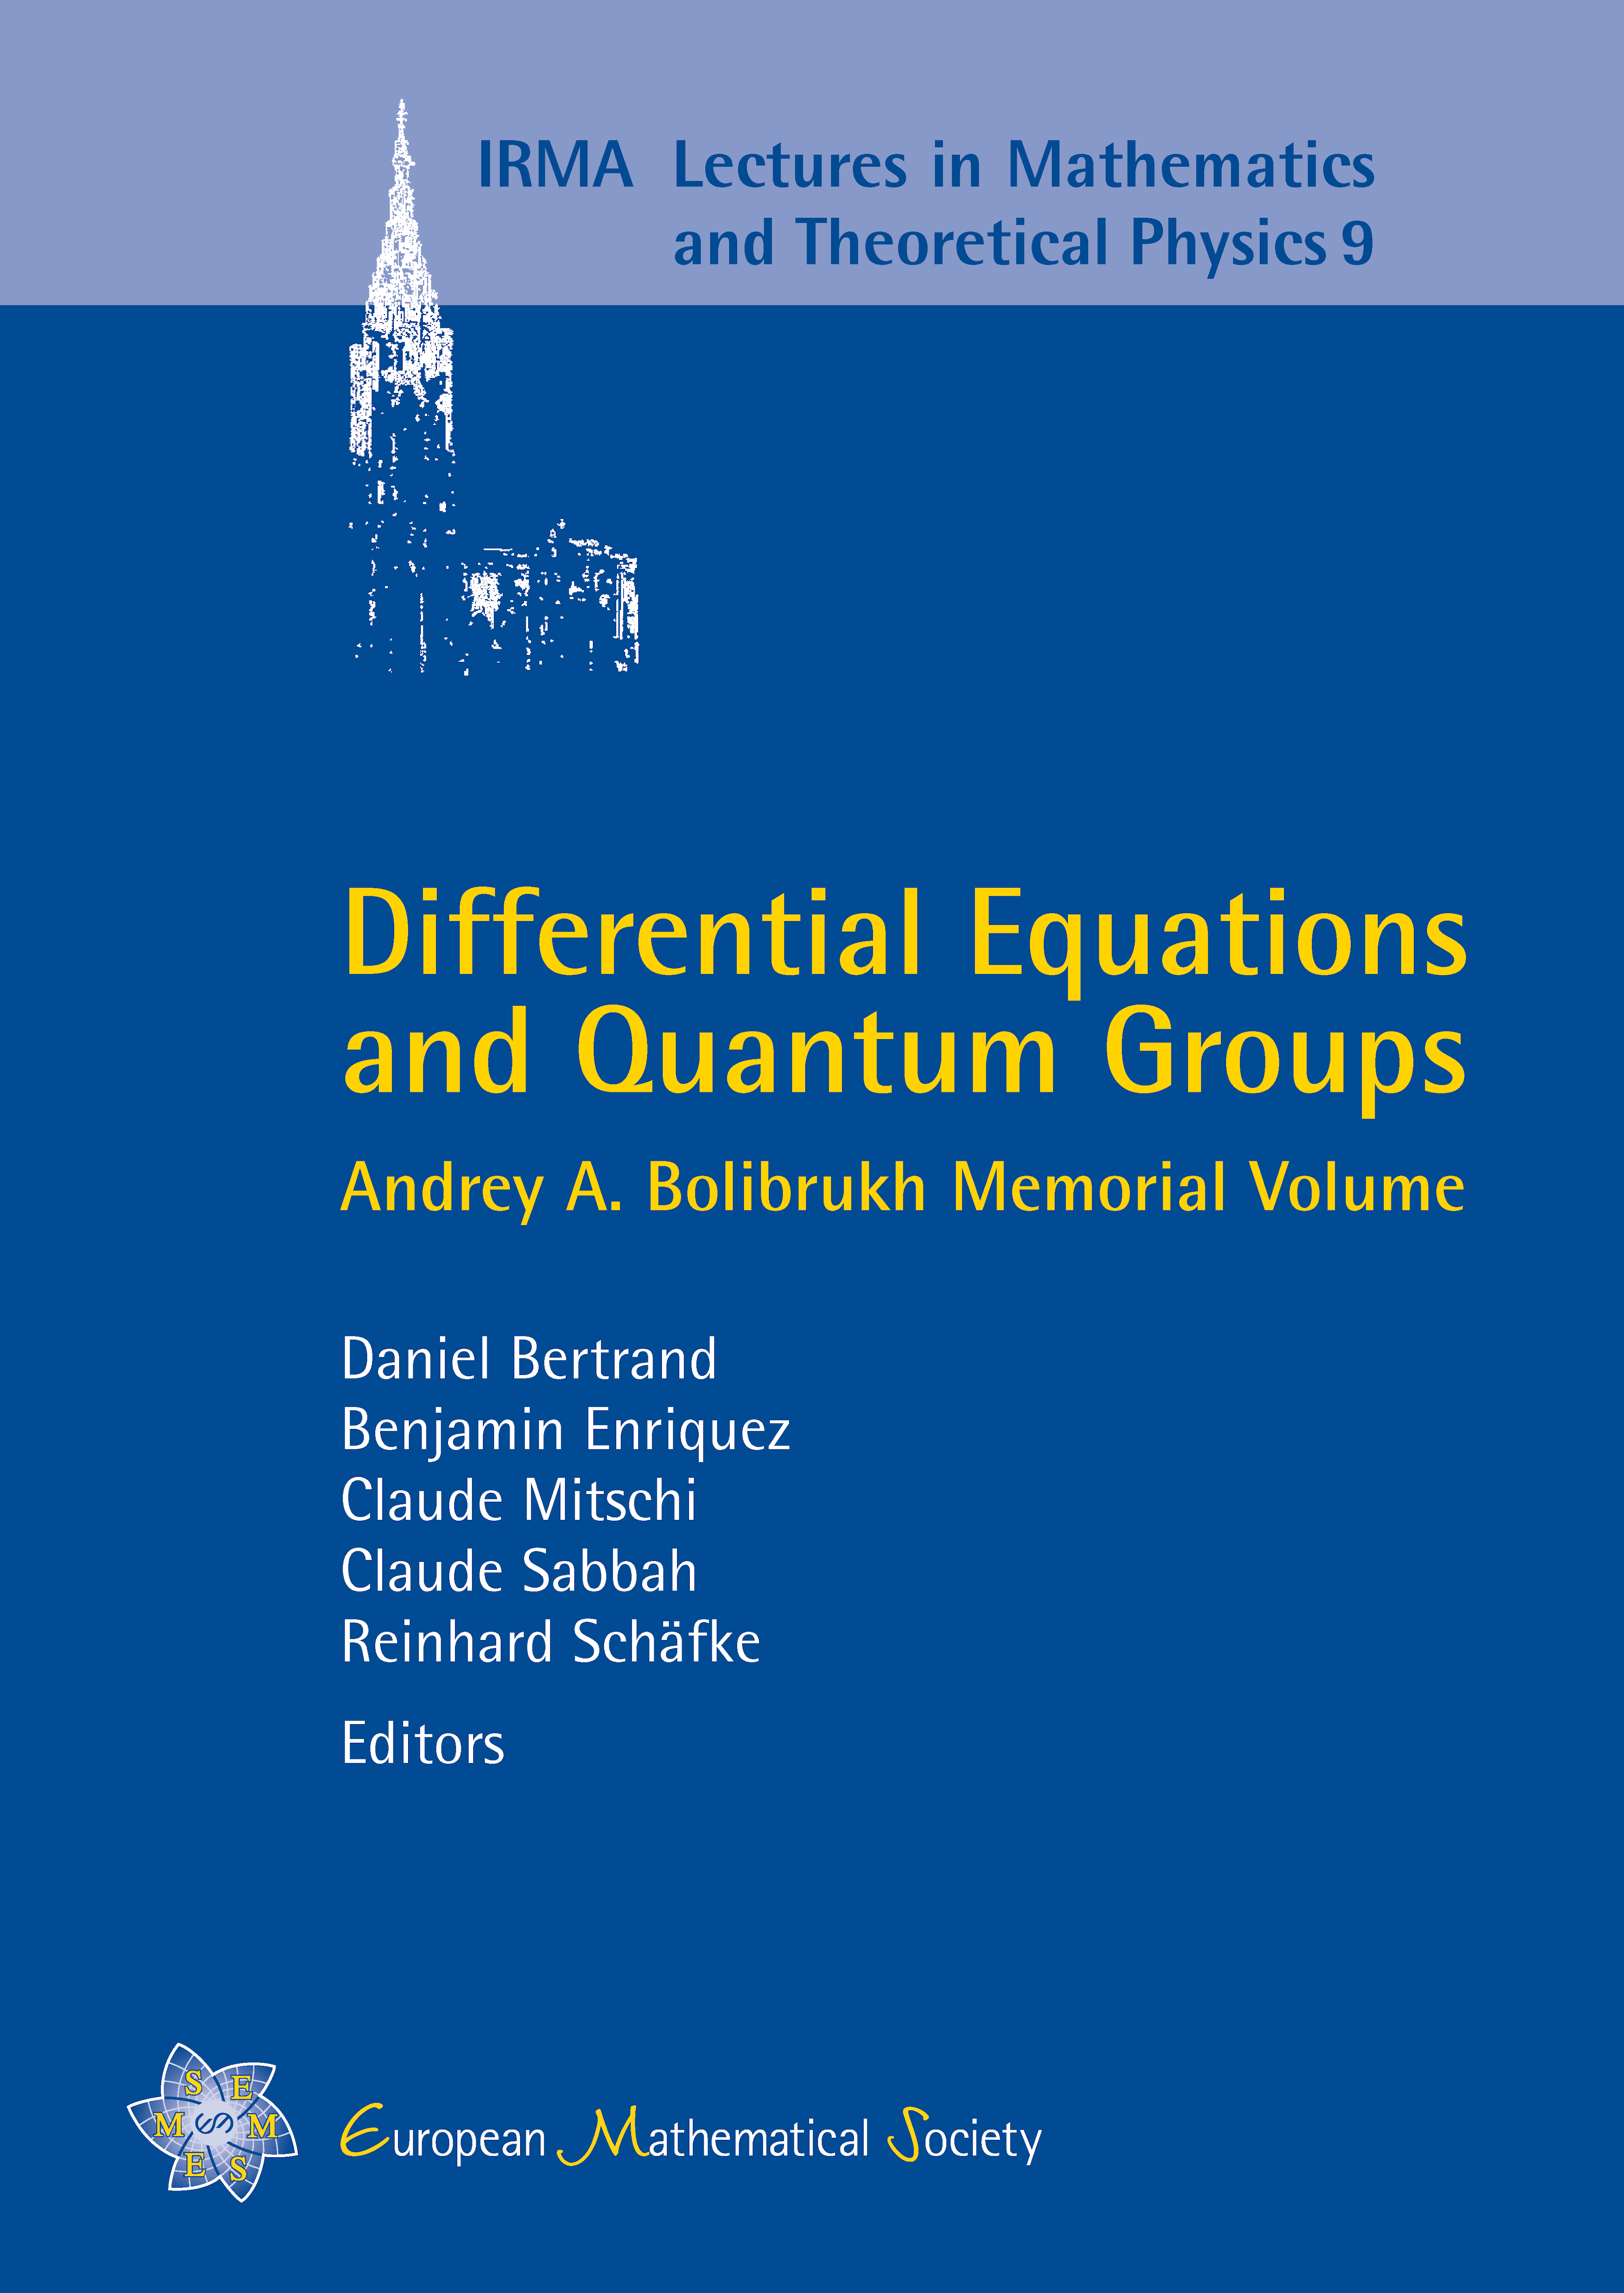 Formal power series solutions of the heat equation in one spatial variable cover